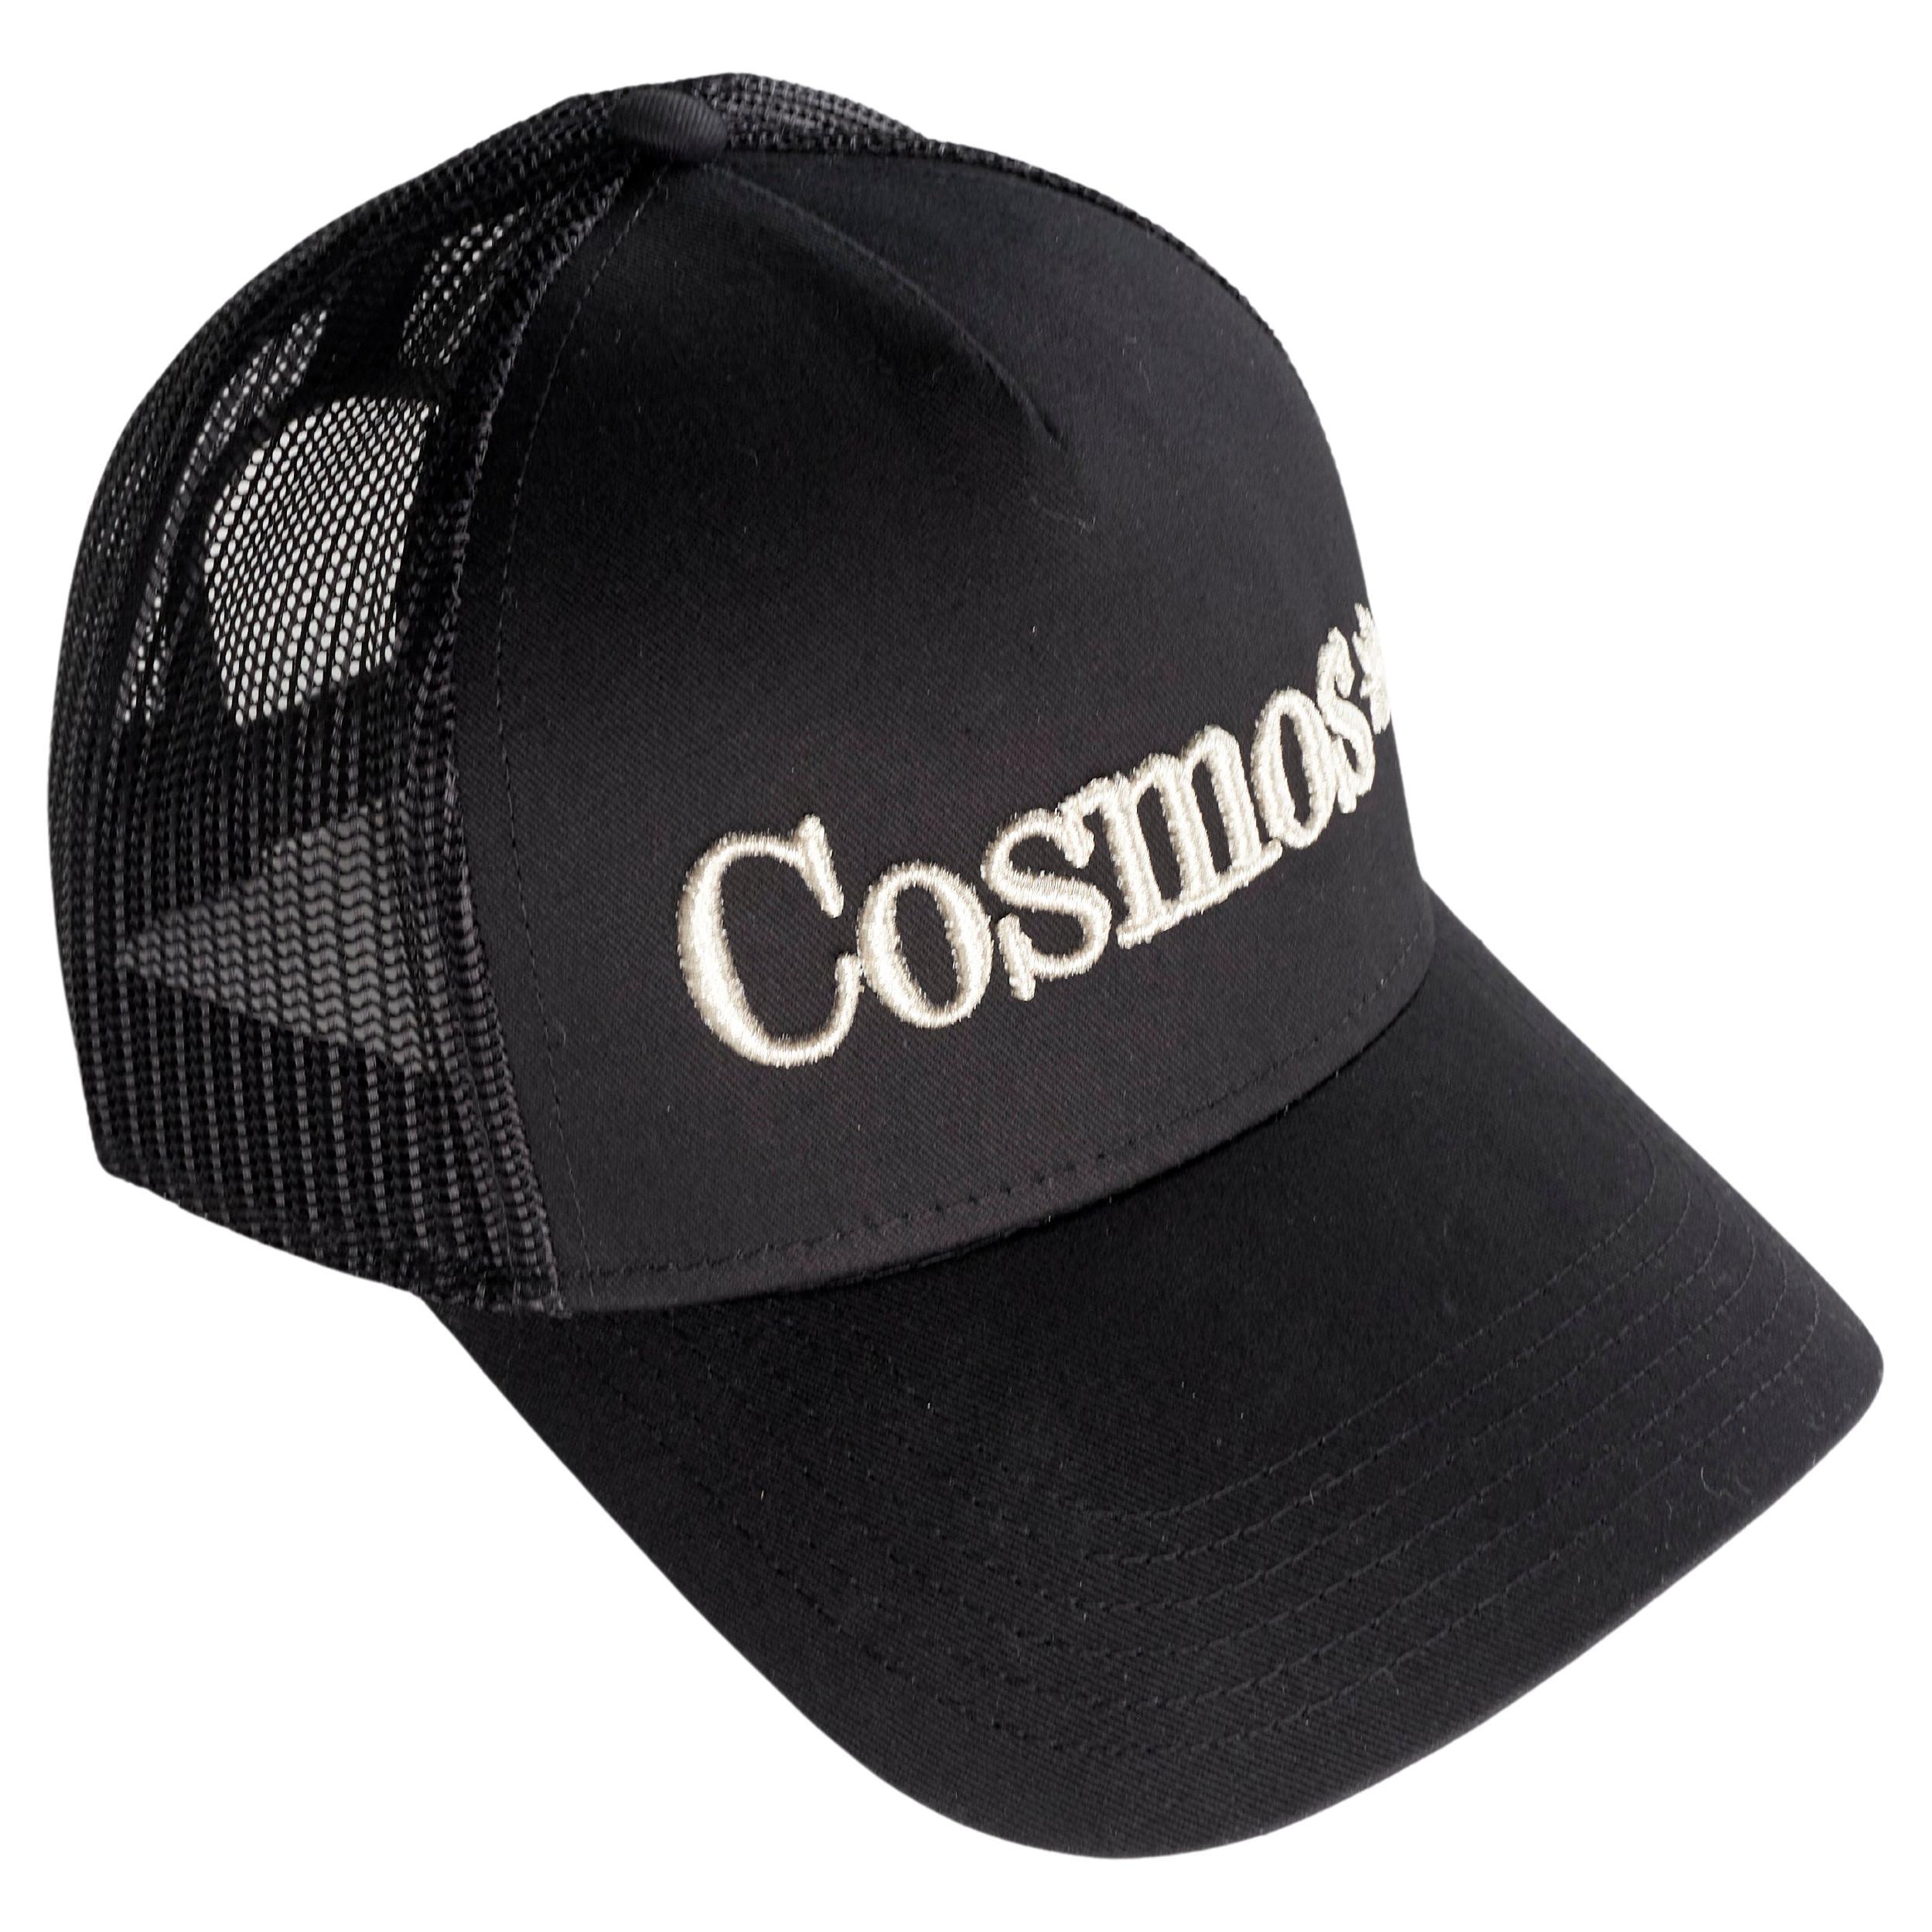 Black Cosmos Trucker Hat Silver Embroidery
Brand: J Dauphin

J Dauphin was created 2006 by Swedish French Johanna Dauphin. She started her career working for LVMH owned Fend at the Italian head office in Rome. She later moved to Paris and J Dauphin